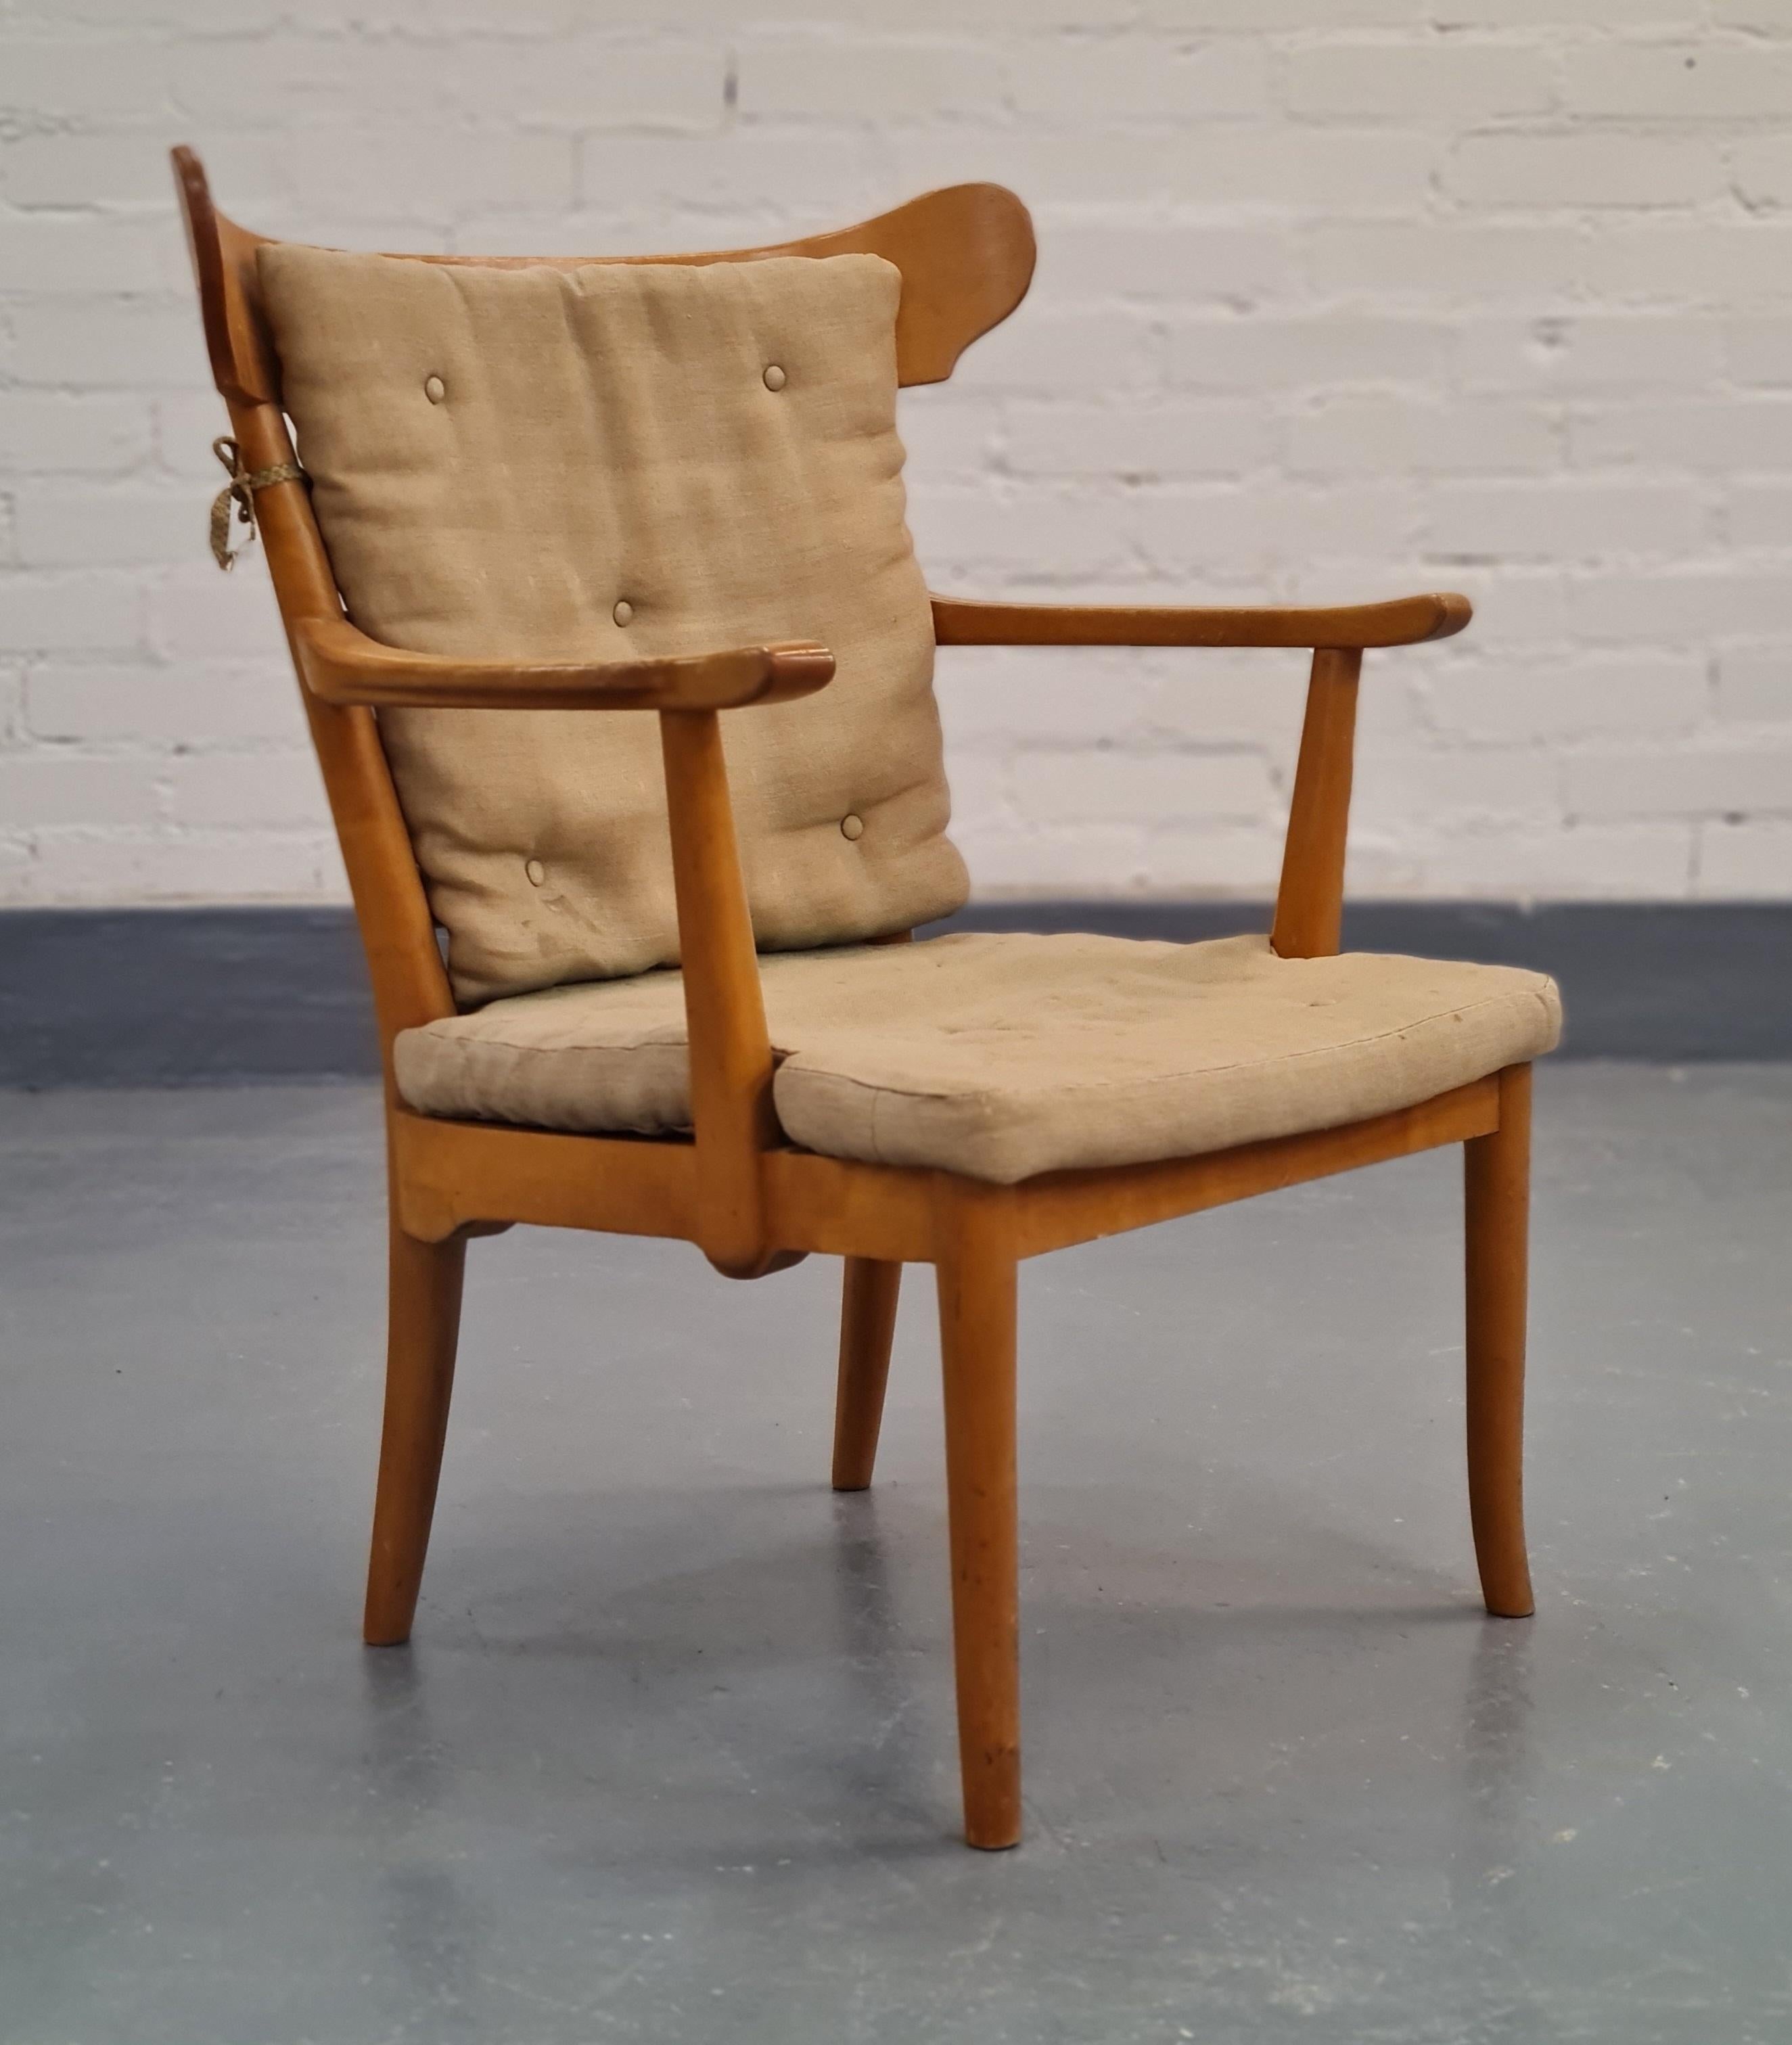 A beautiful 'museum piece' of the rare Carl-Johan Boman 'Astrid' chair that according to the Boman archives has been designed before 1947 with little more information. One thing that was mentioned is that customers could order this chair with the